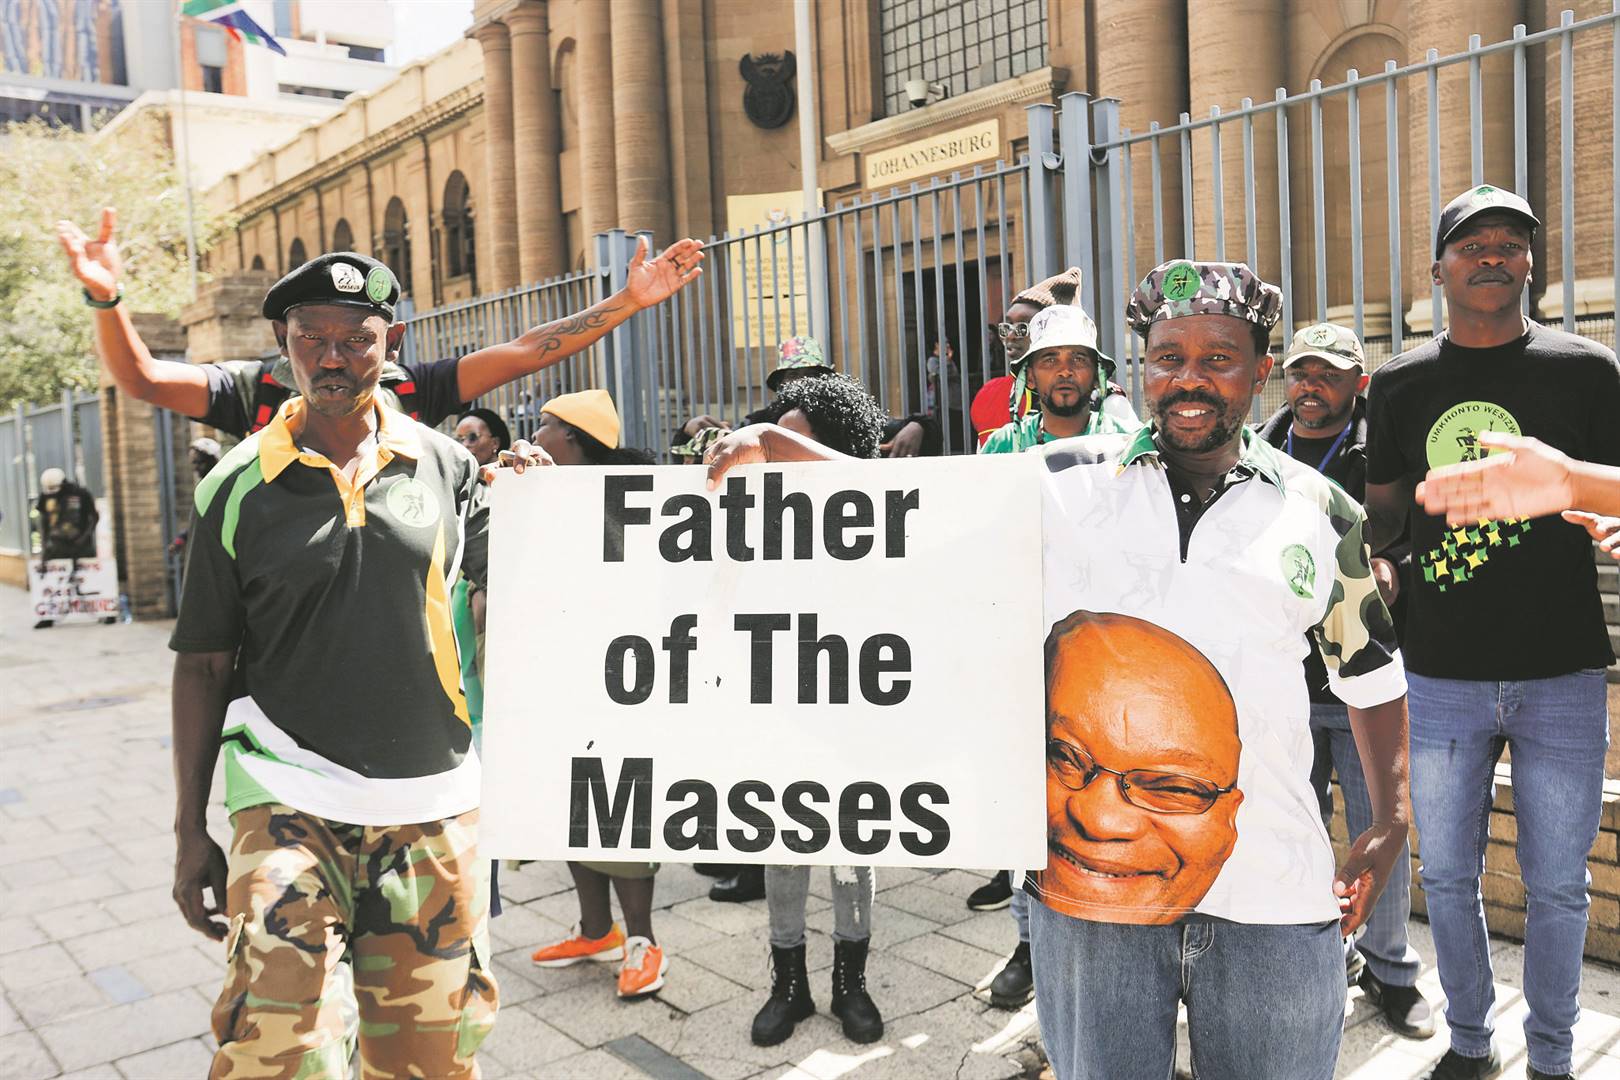 The MK Party has proven in the last six months to be fueled by Zuma’s desire to seek revenge against "Ramaphosa's ANC" and organised by rogue elements who have found a way to profit from this, writes the author. (Fani Mahuntsi/Gallo Images)